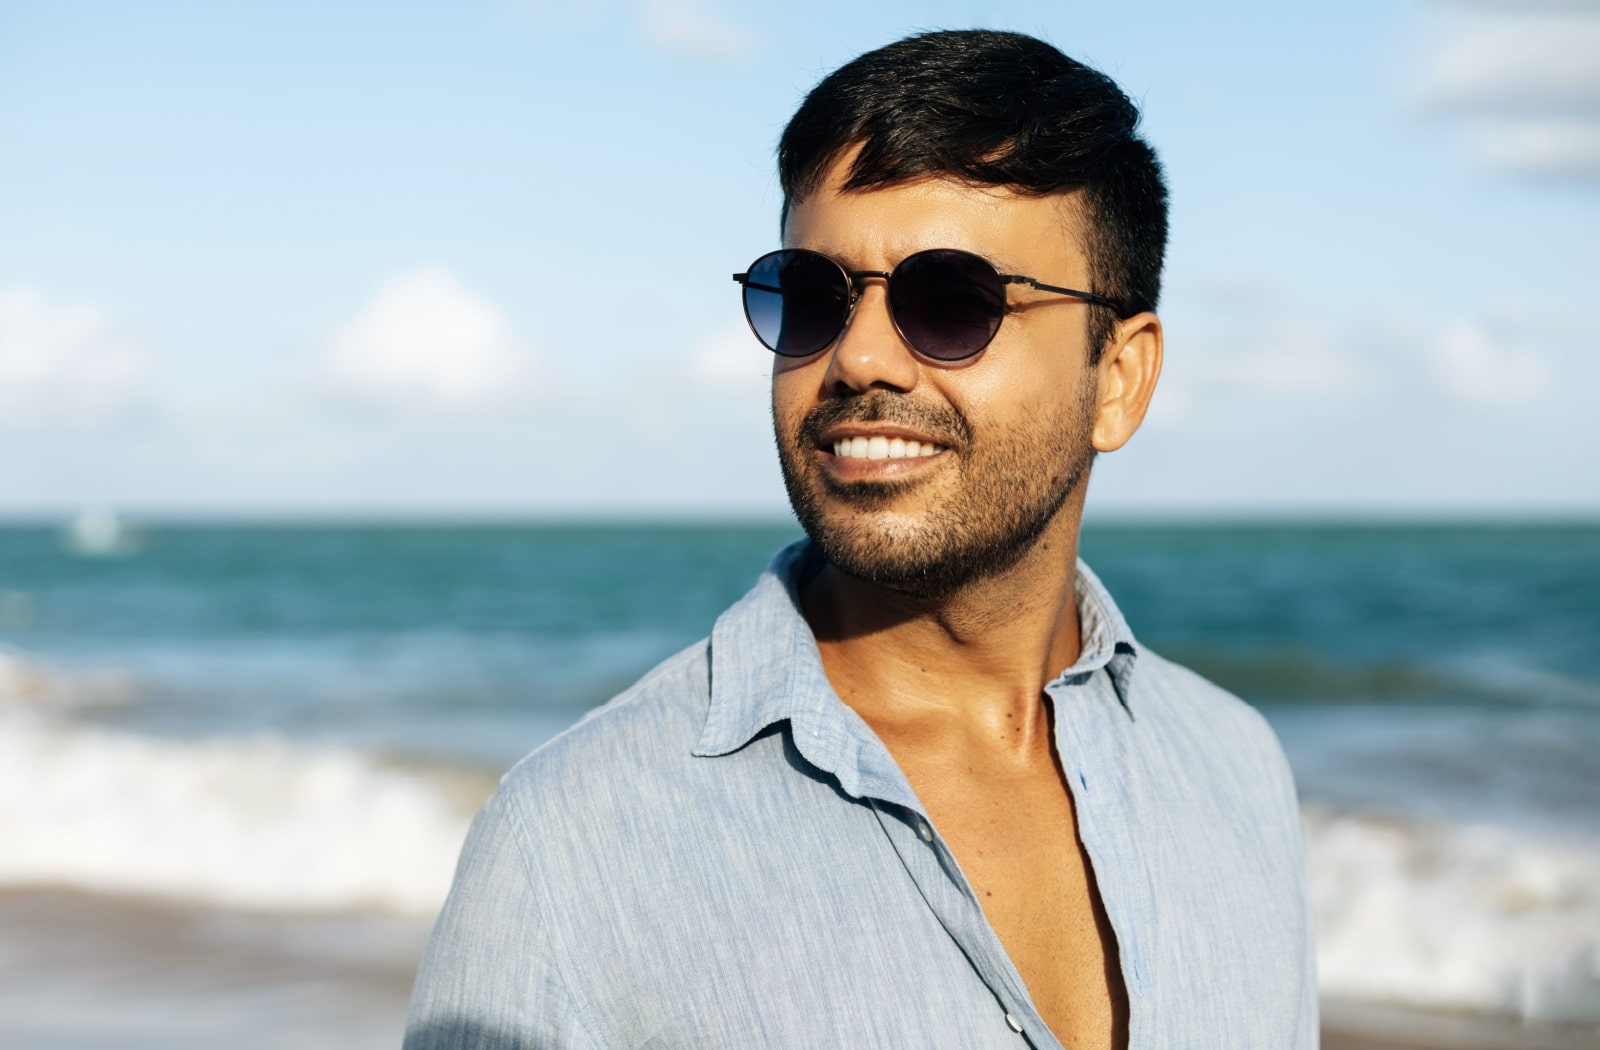 A man smiling and wearing polarized sunglasses at the beach.